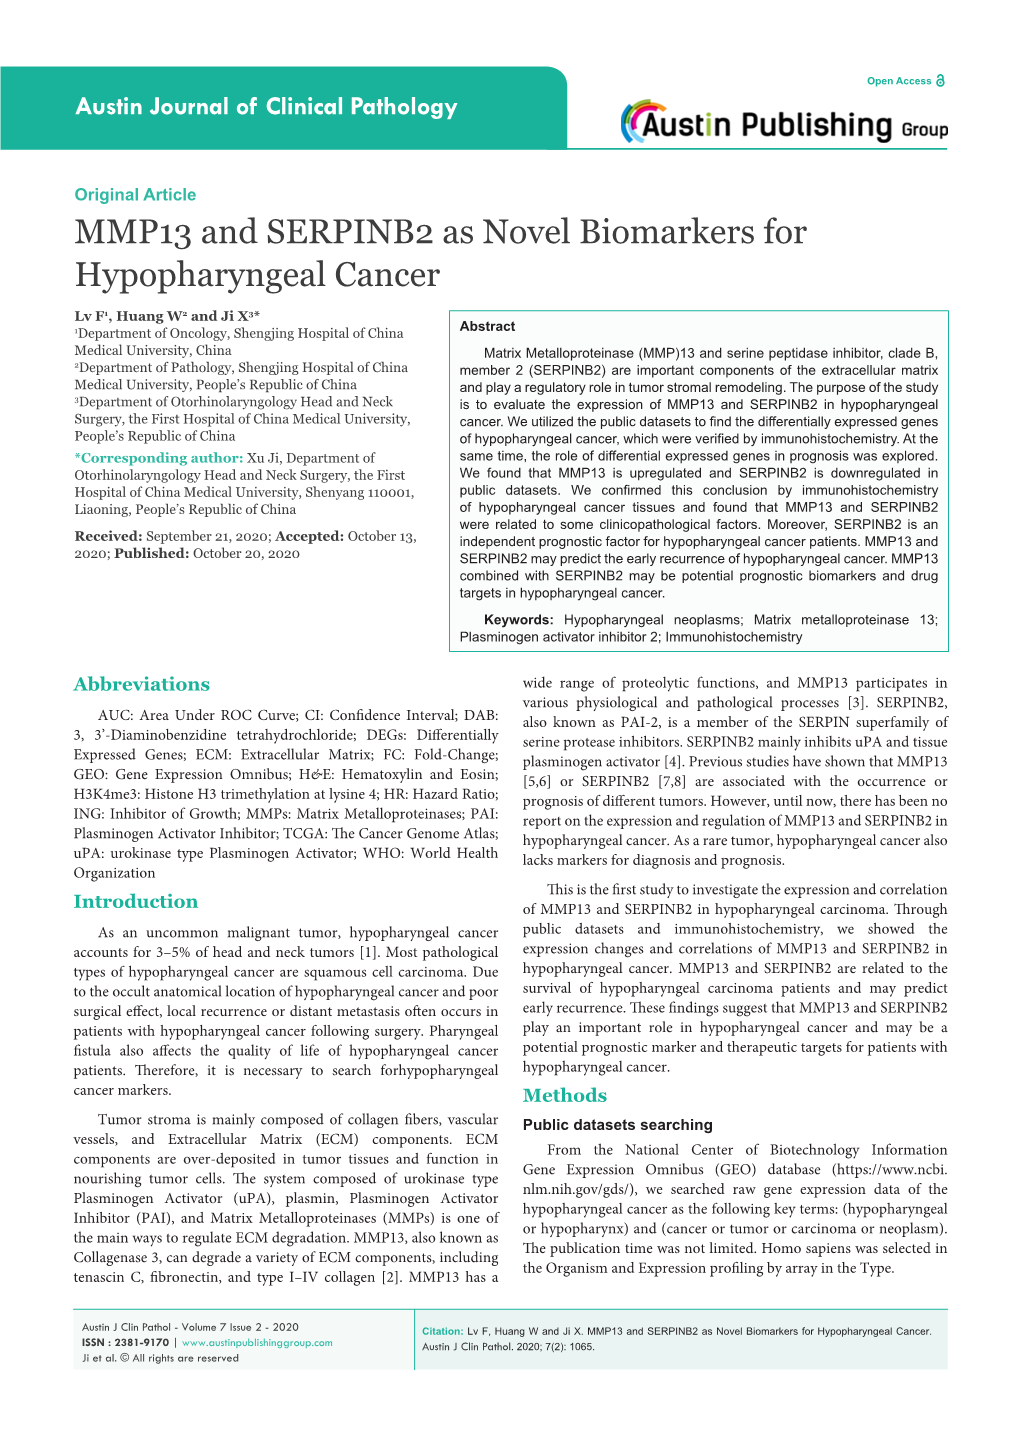 MMP13 and SERPINB2 As Novel Biomarkers for Hypopharyngeal Cancer